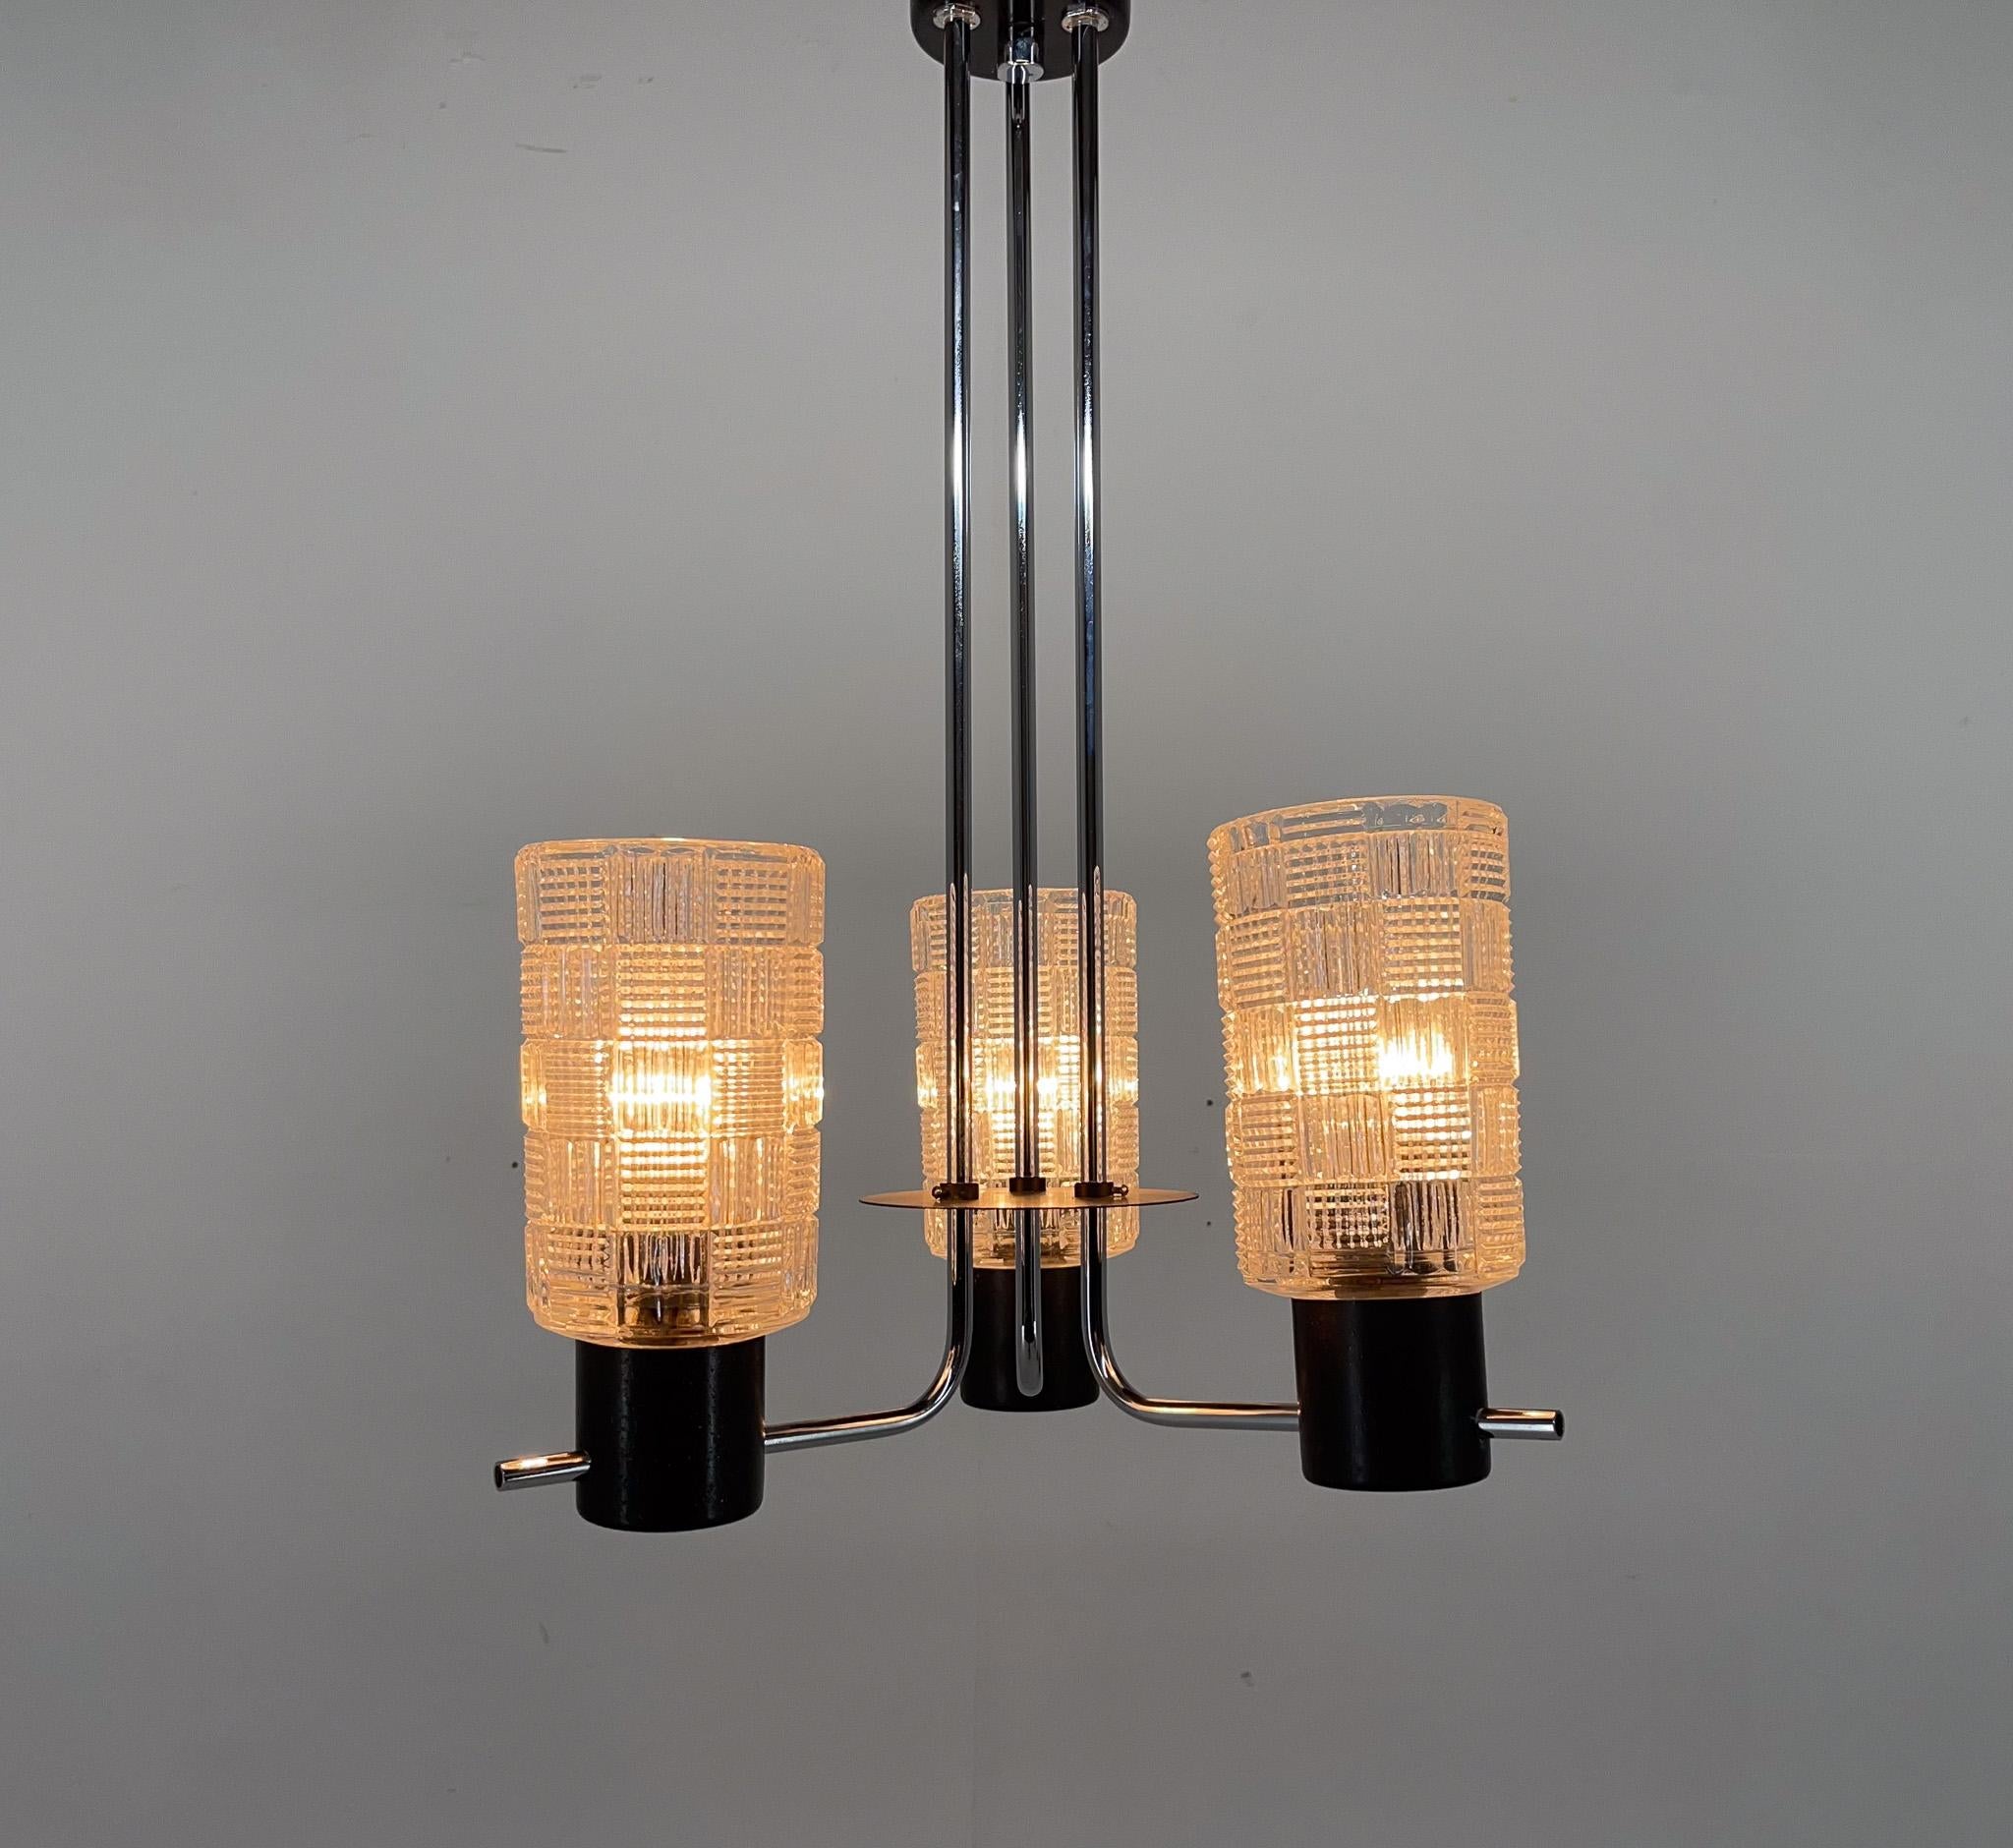 Vintage chandelier made of chrome, metal and three clear glass shades. Produced in former Czechoslovakia in the 1970's. 
Bulbs: 3x 1 E26-27. US wiring compatible.